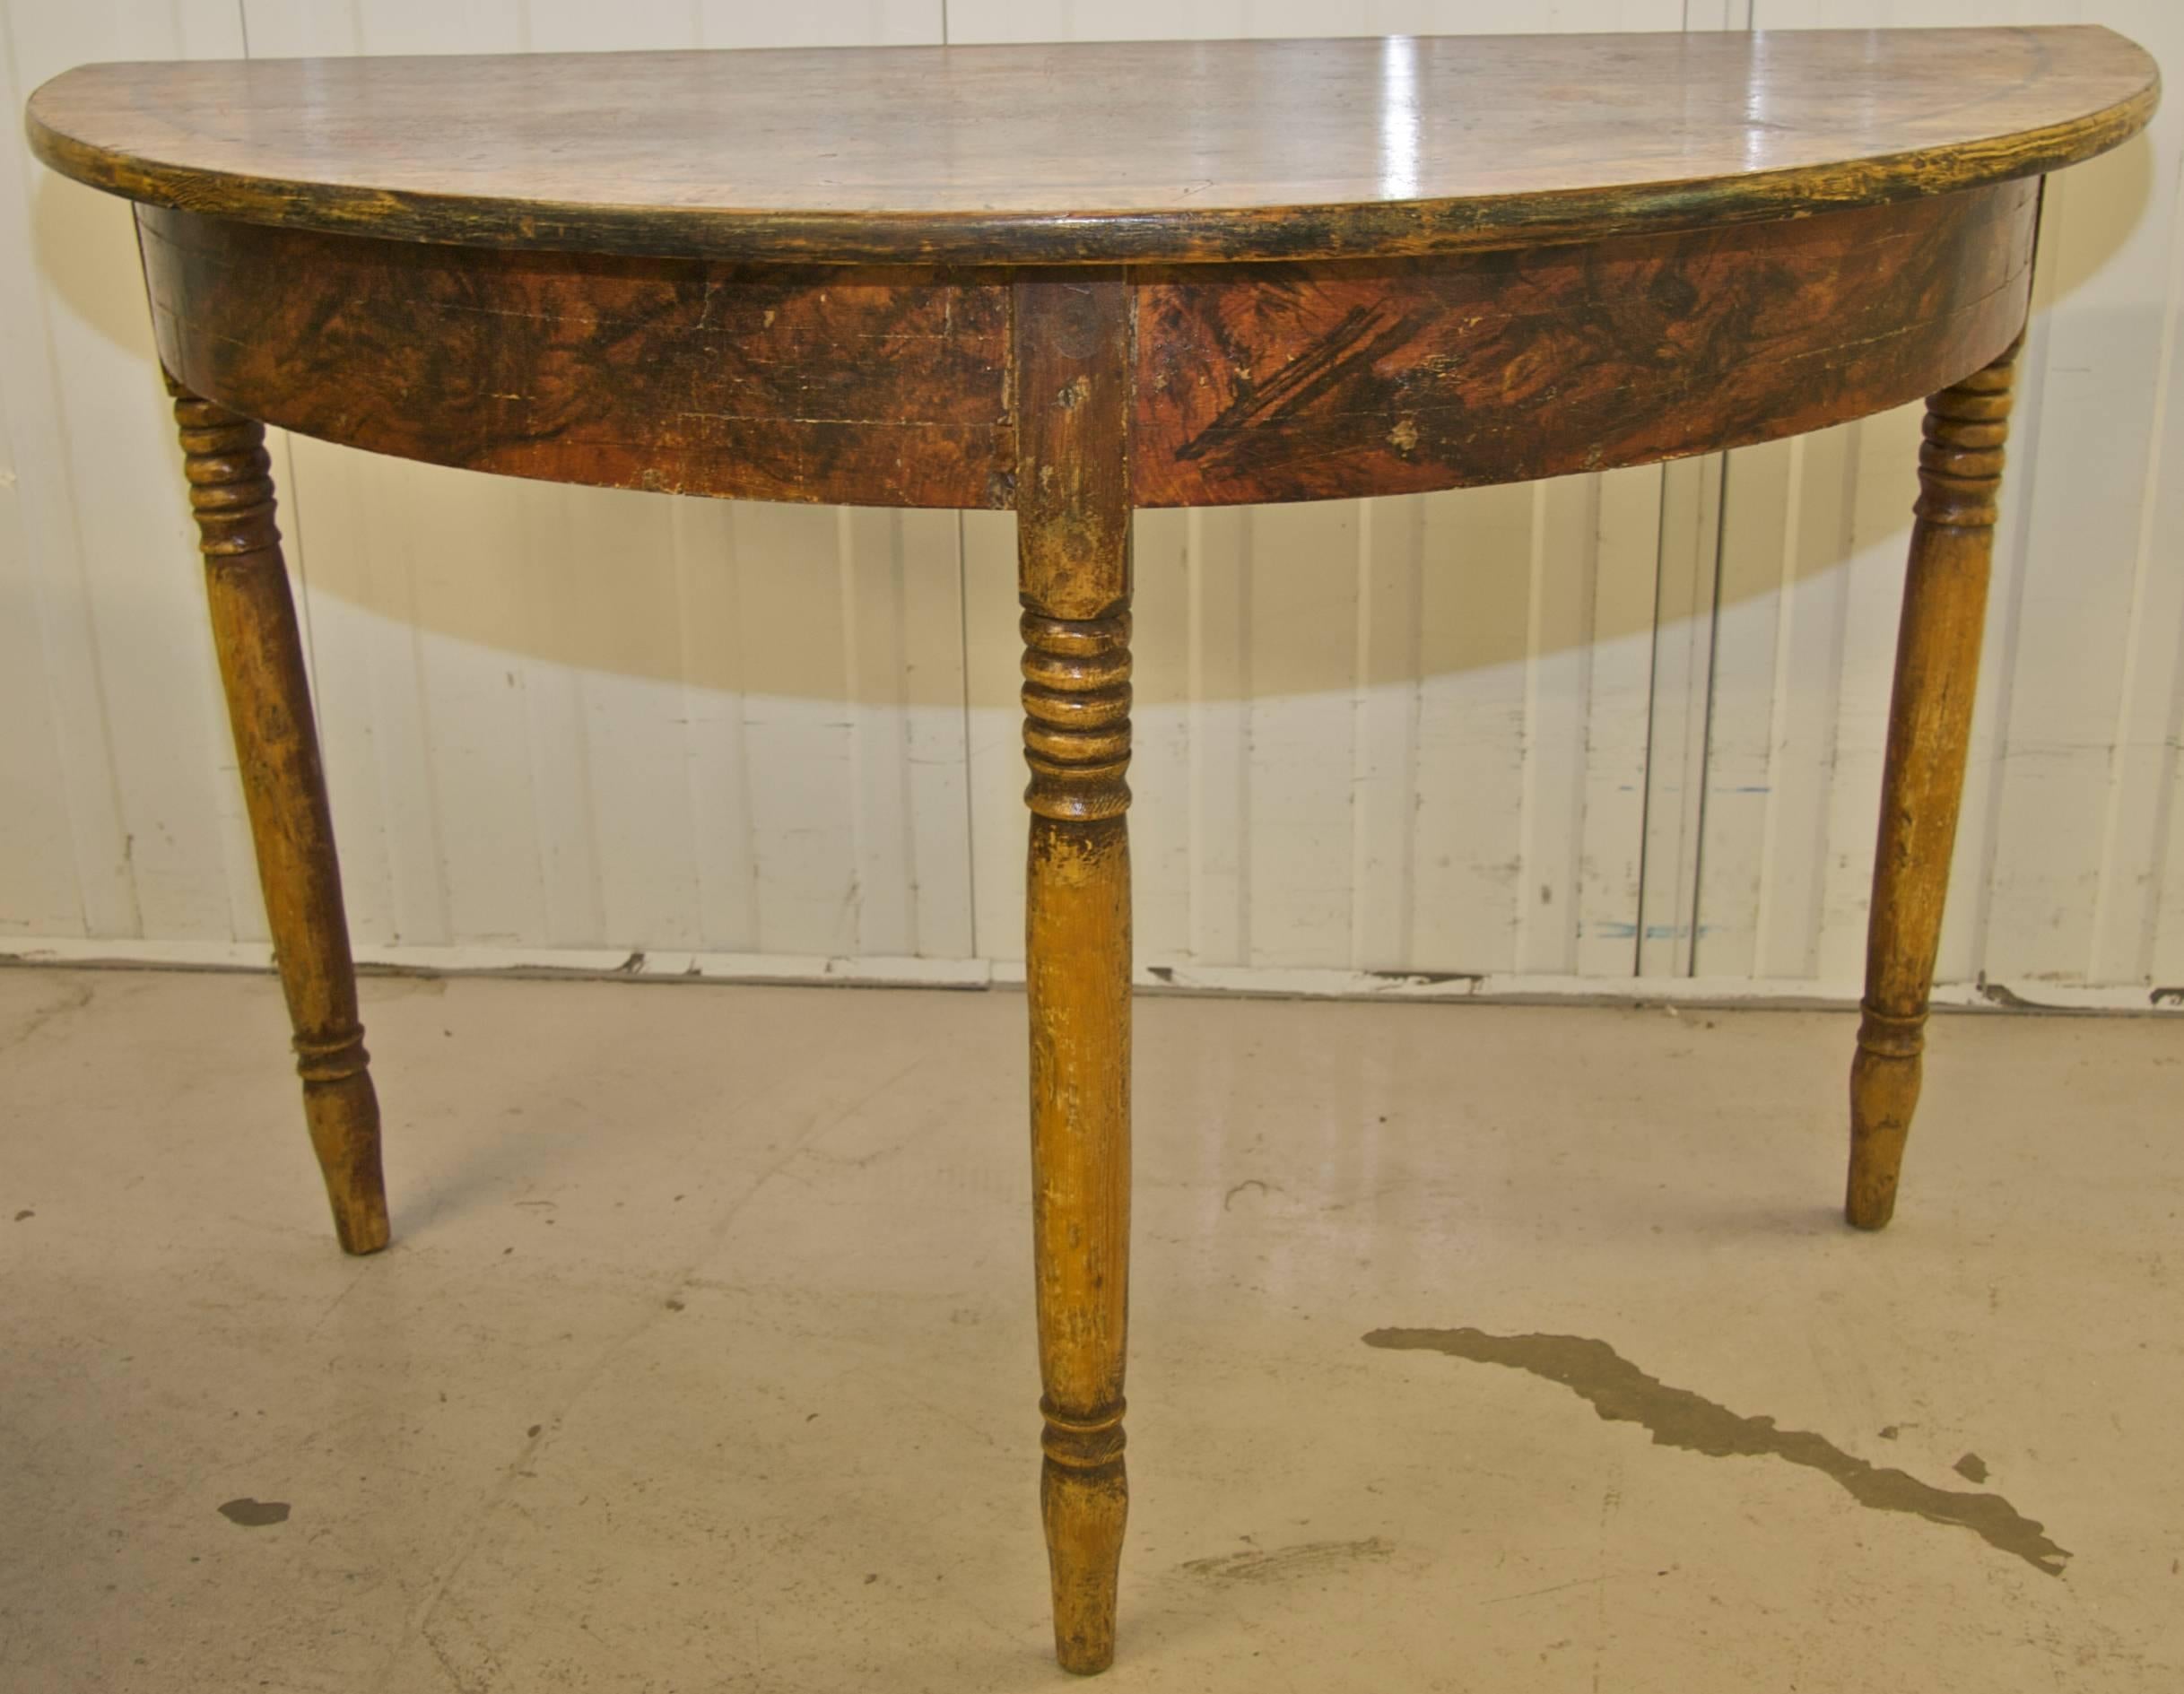 Rare pair of North Swedish Gustavian demilune tables hand decorated in delicious faux wood grain in the Classic Kurbits Folk Art tradition.

Lovely slender Gustavian Style legs.

The tables have acquired a lovely patina of age and are structurally